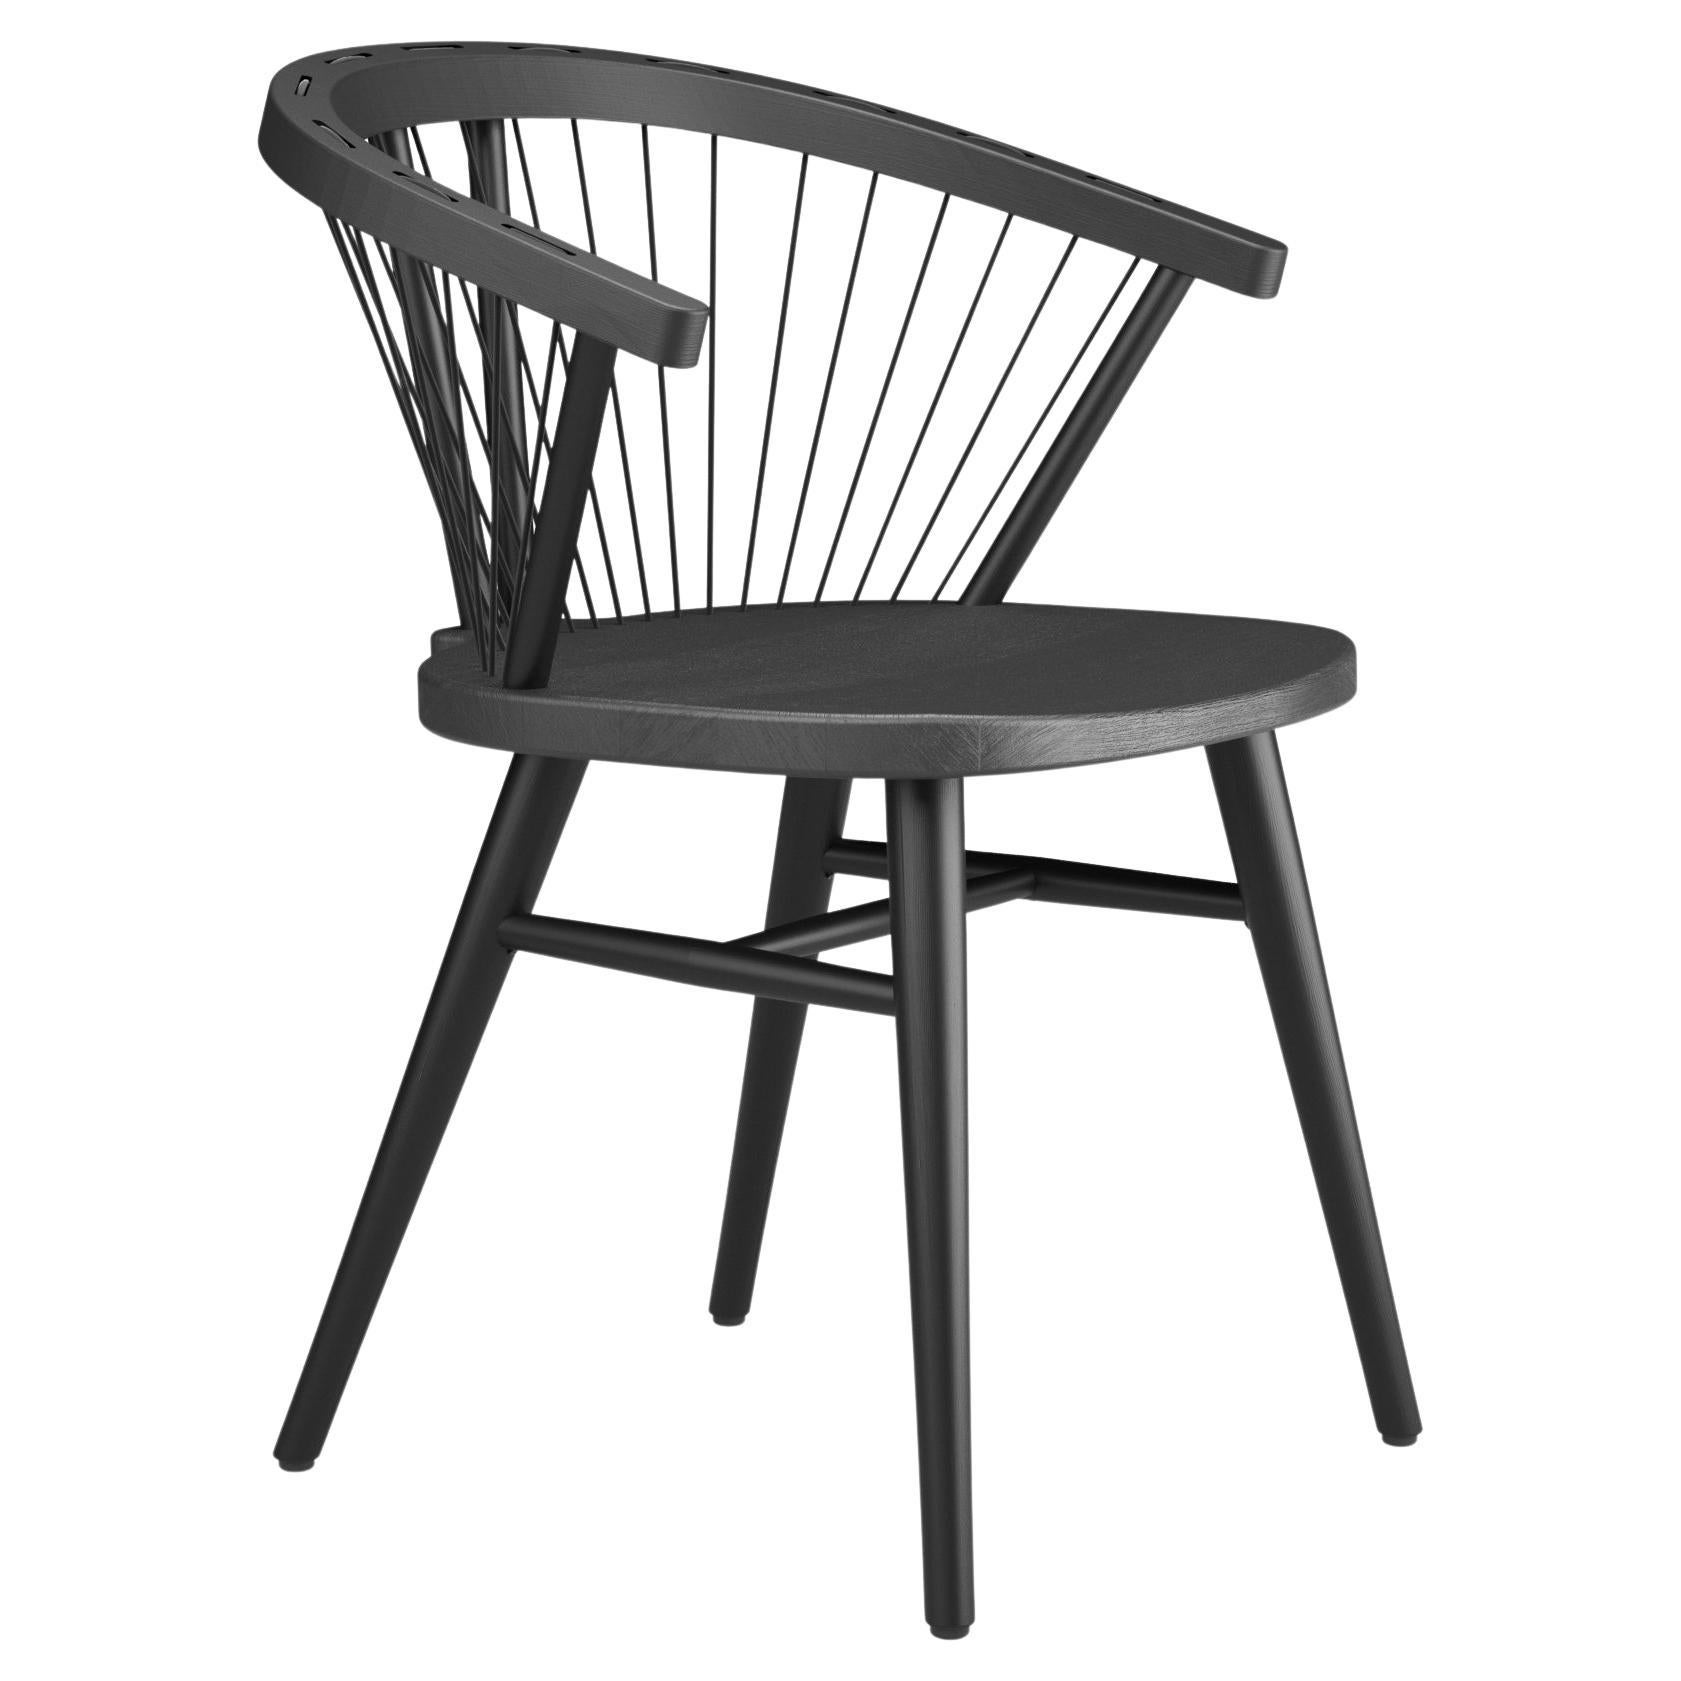 Hayche Cuerdas Rounded chair, Black, UK, Made To Order For Sale